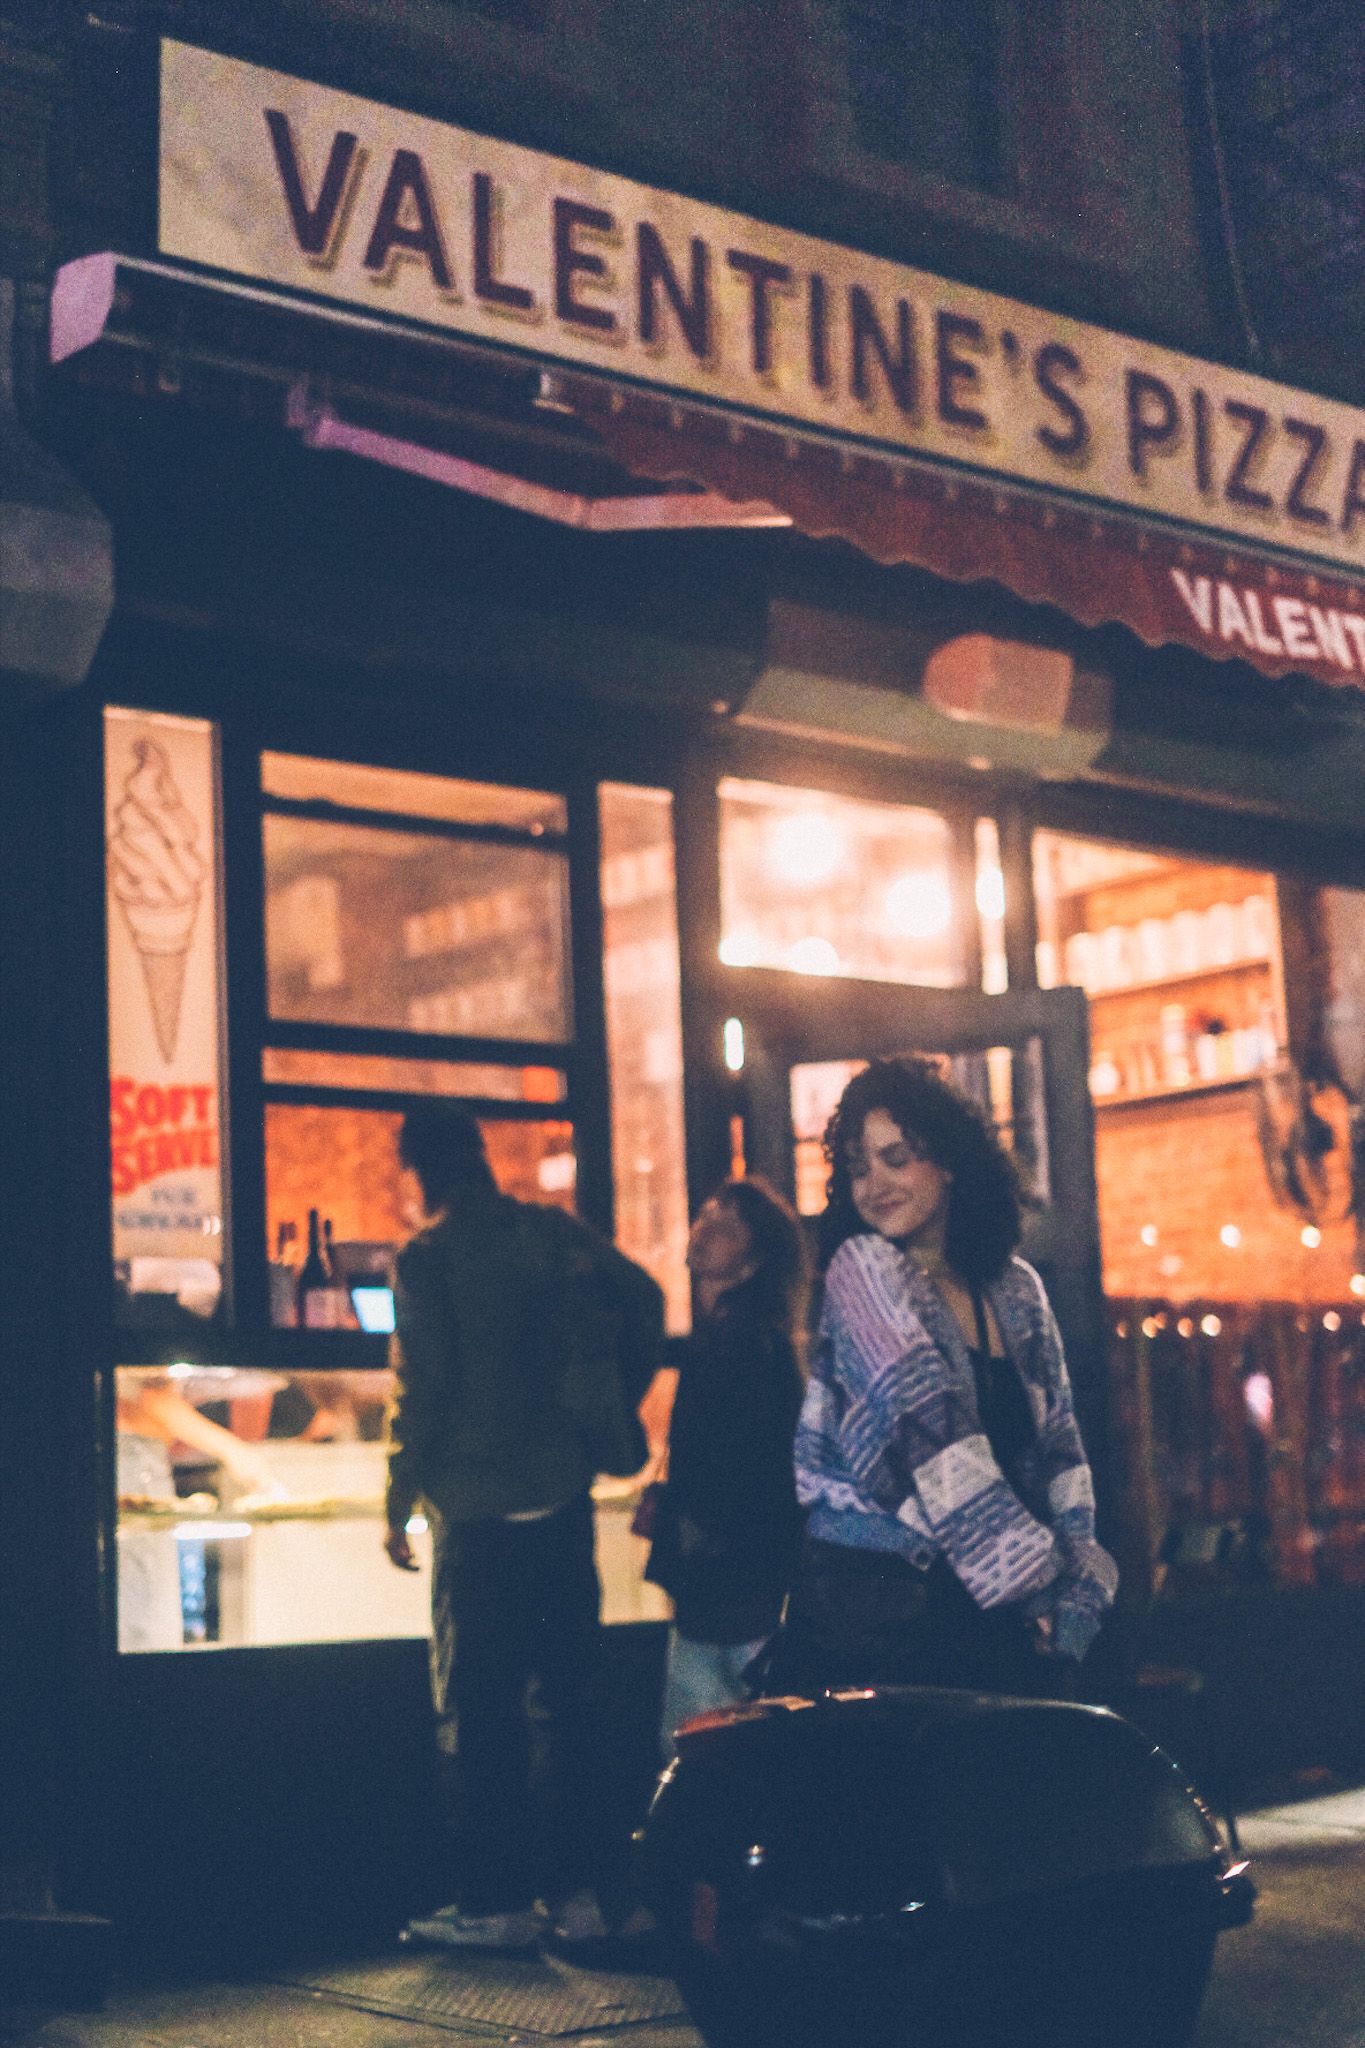 A woman stands mid-ground in front of a storefront that says Valentine’s Pizza, at night, while people stand at the window ordering pizza behind her, just out of focus.